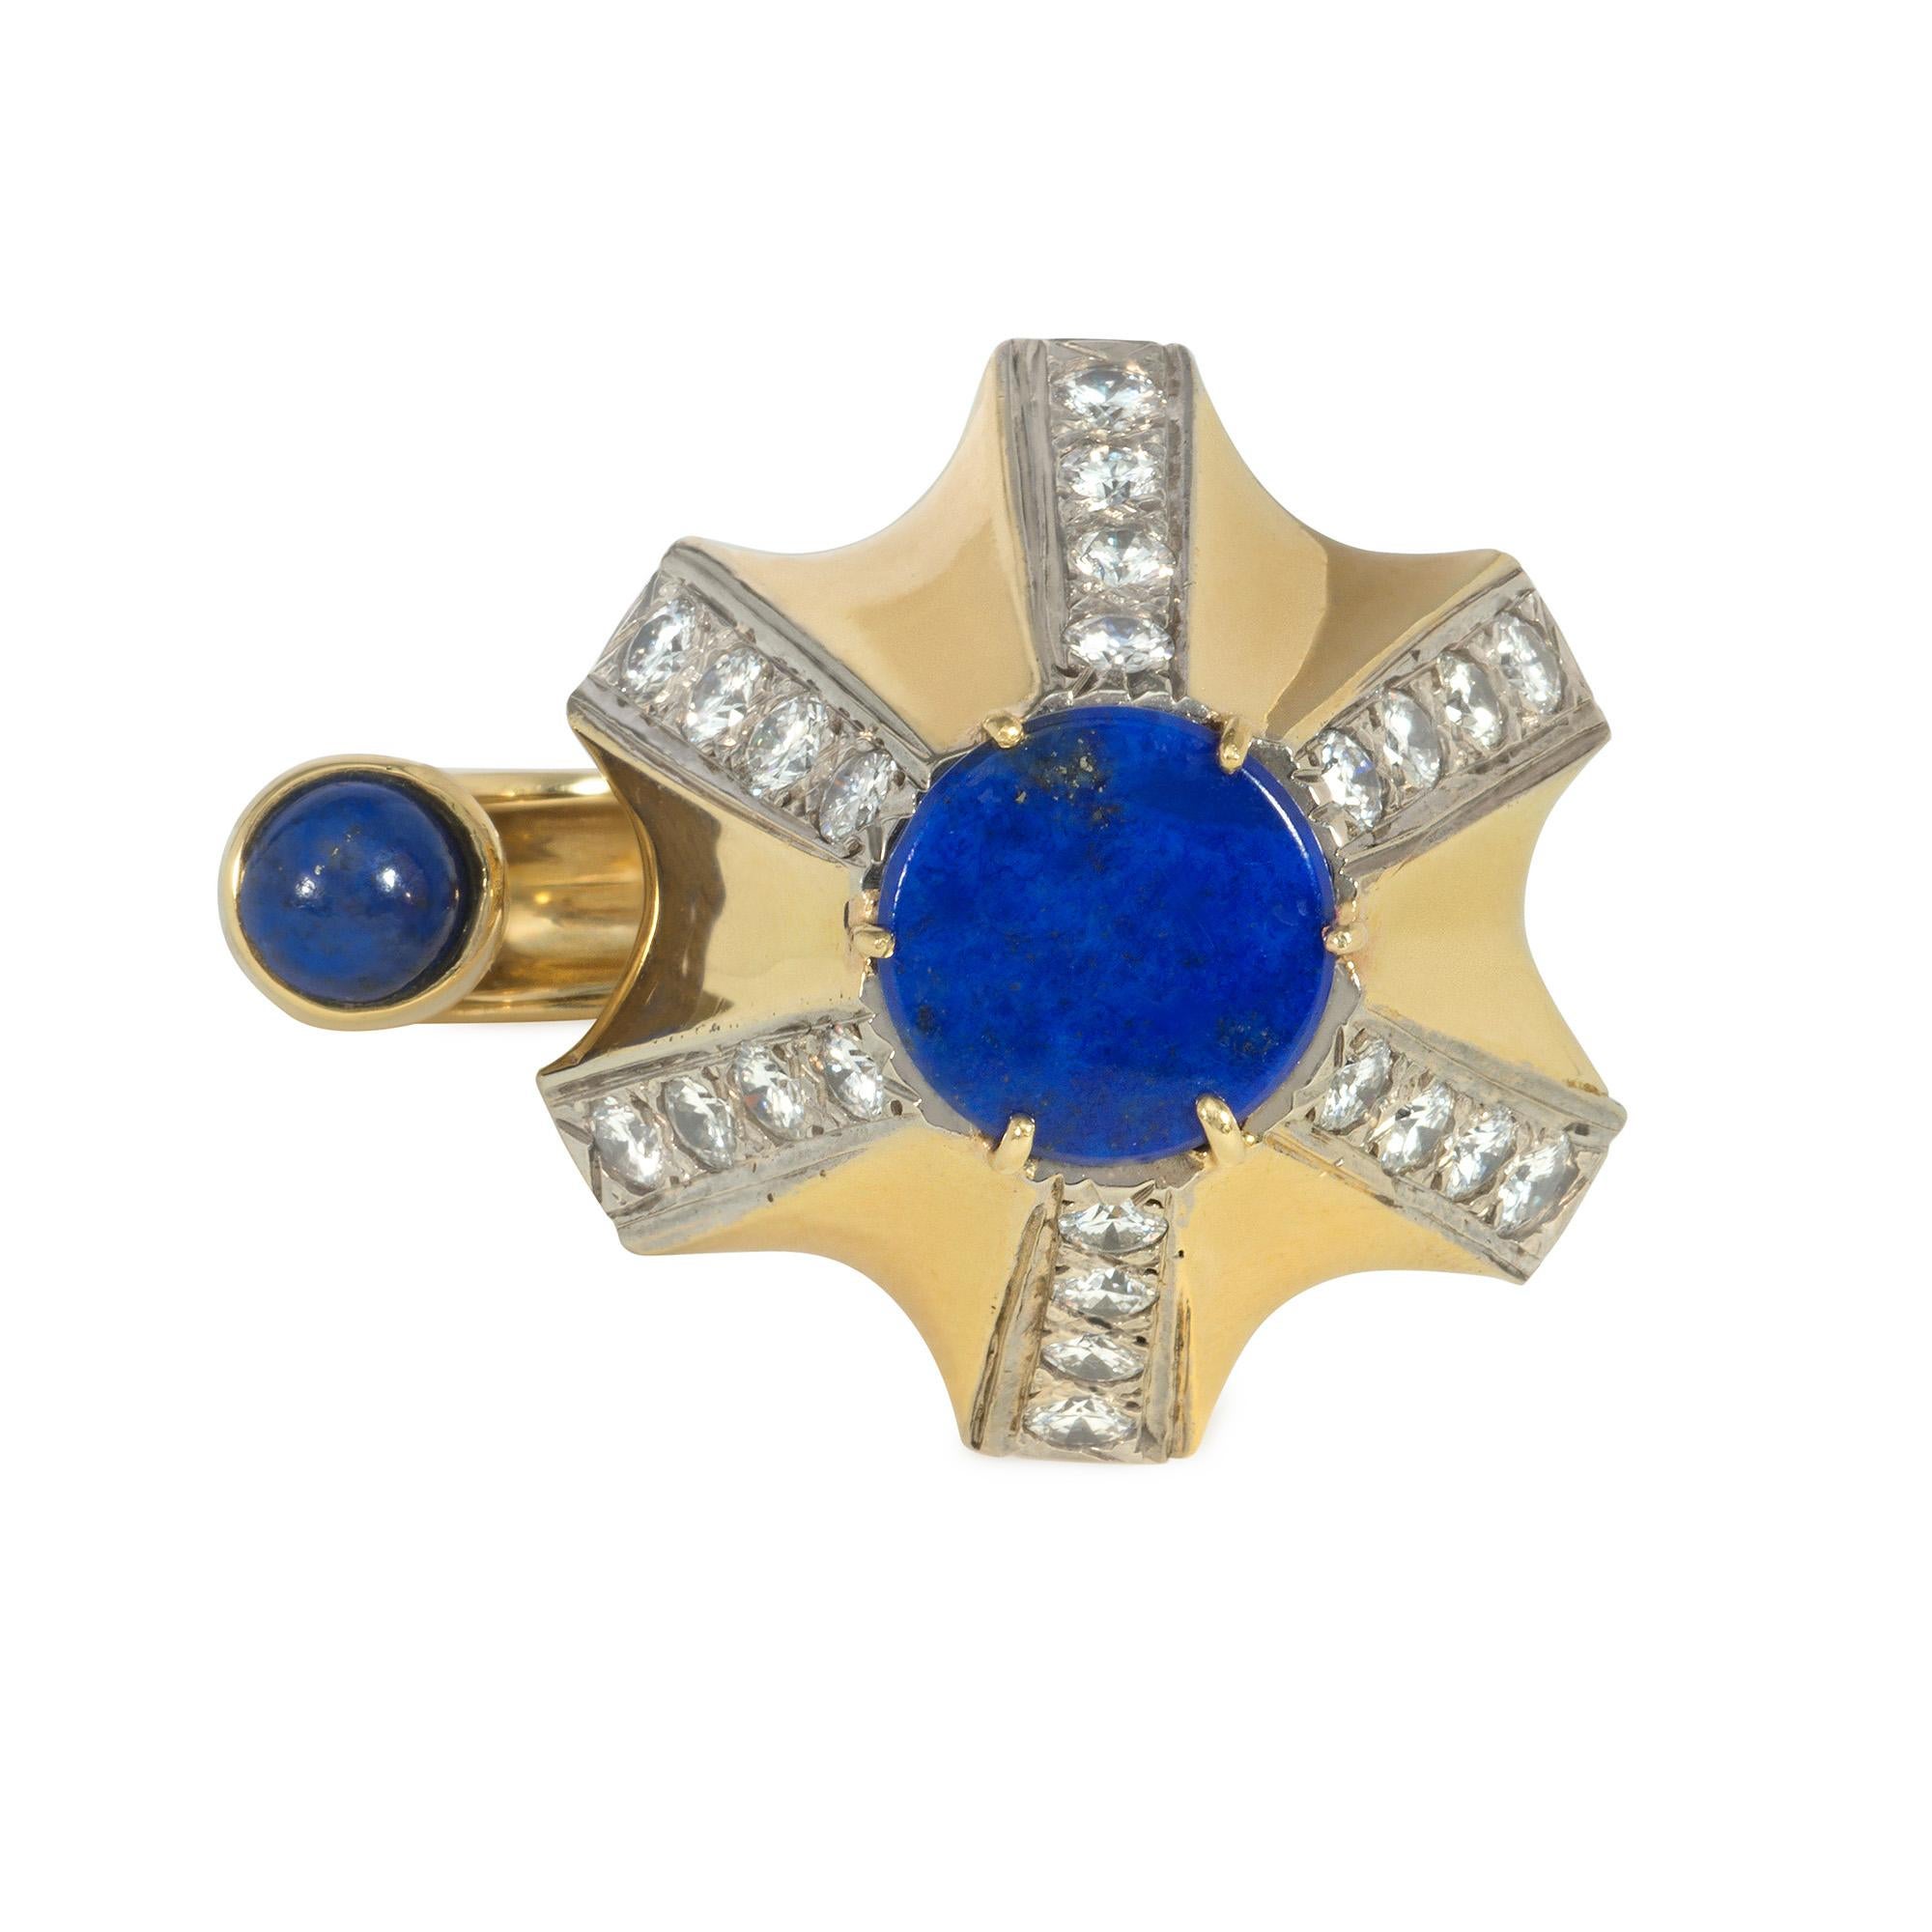 Modernist Dinh Van for Cartier 1970s Lapis, Diamond, and Gold Ring of Geometric Design For Sale